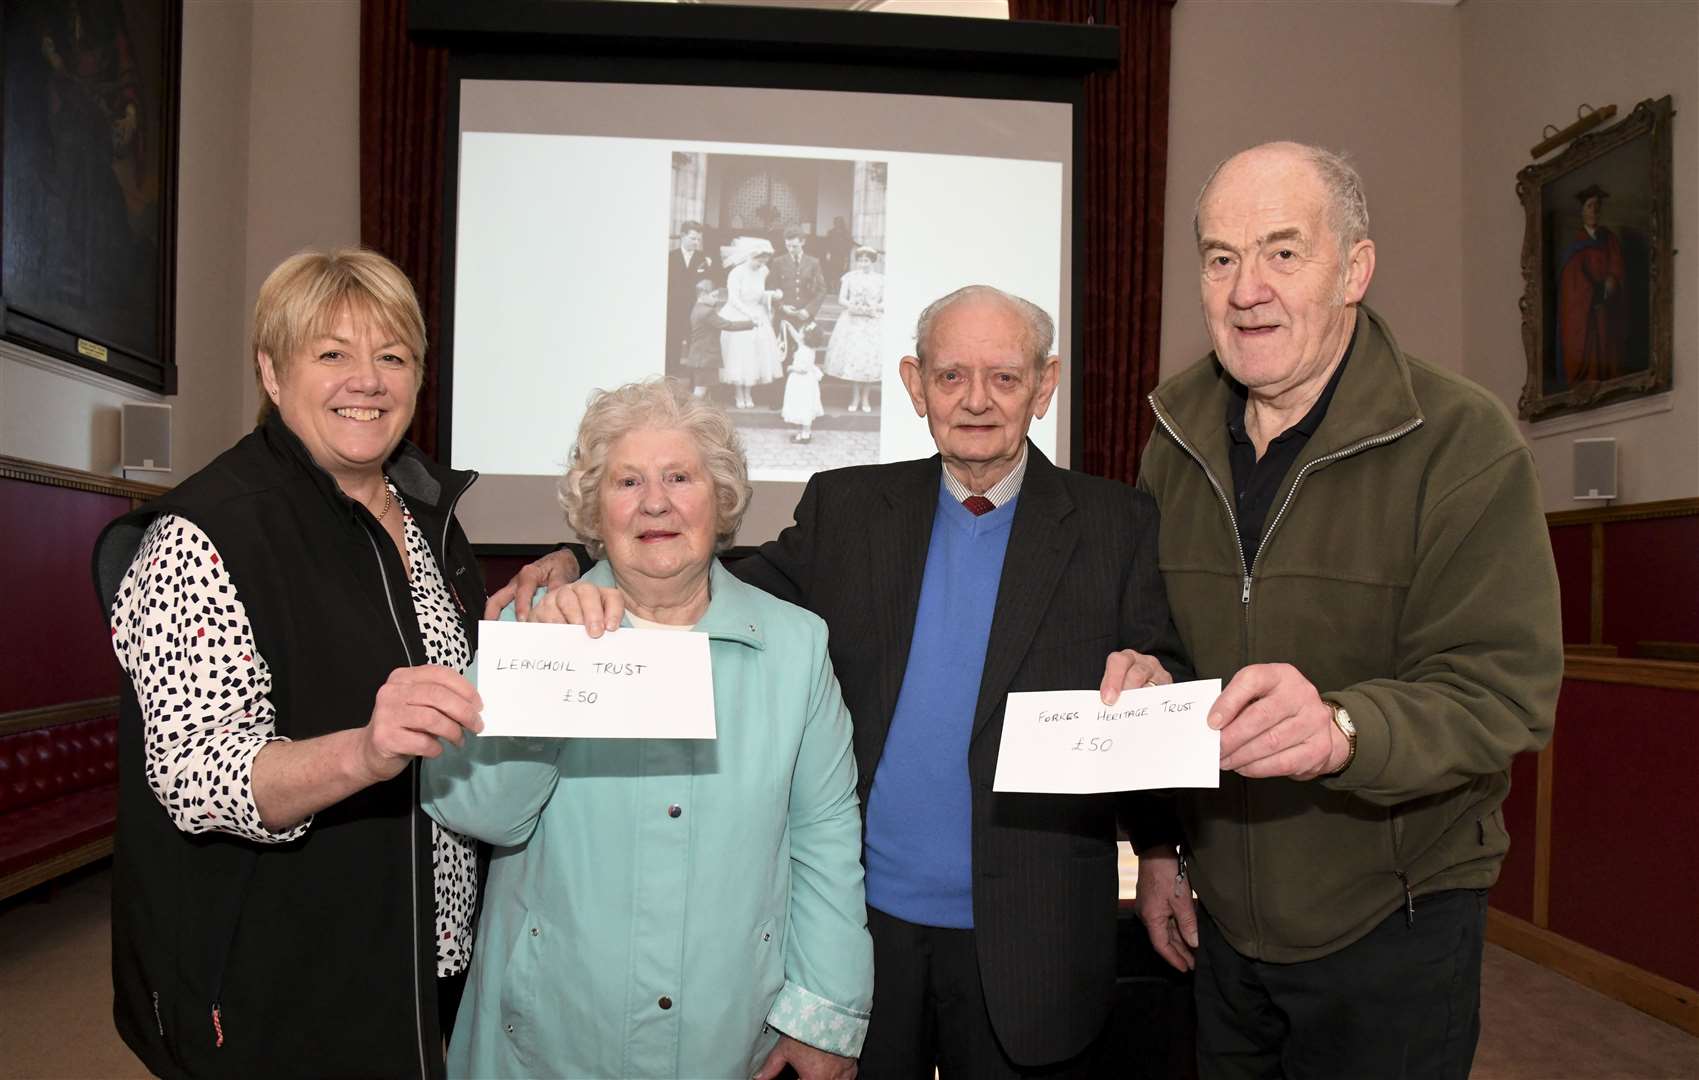 Jo Lenihan of the Leanchoil Trust and George Alexander of Forres Heritage Trust accept donations of £50 each from the Haywoods. Picture: Becky Saunderson